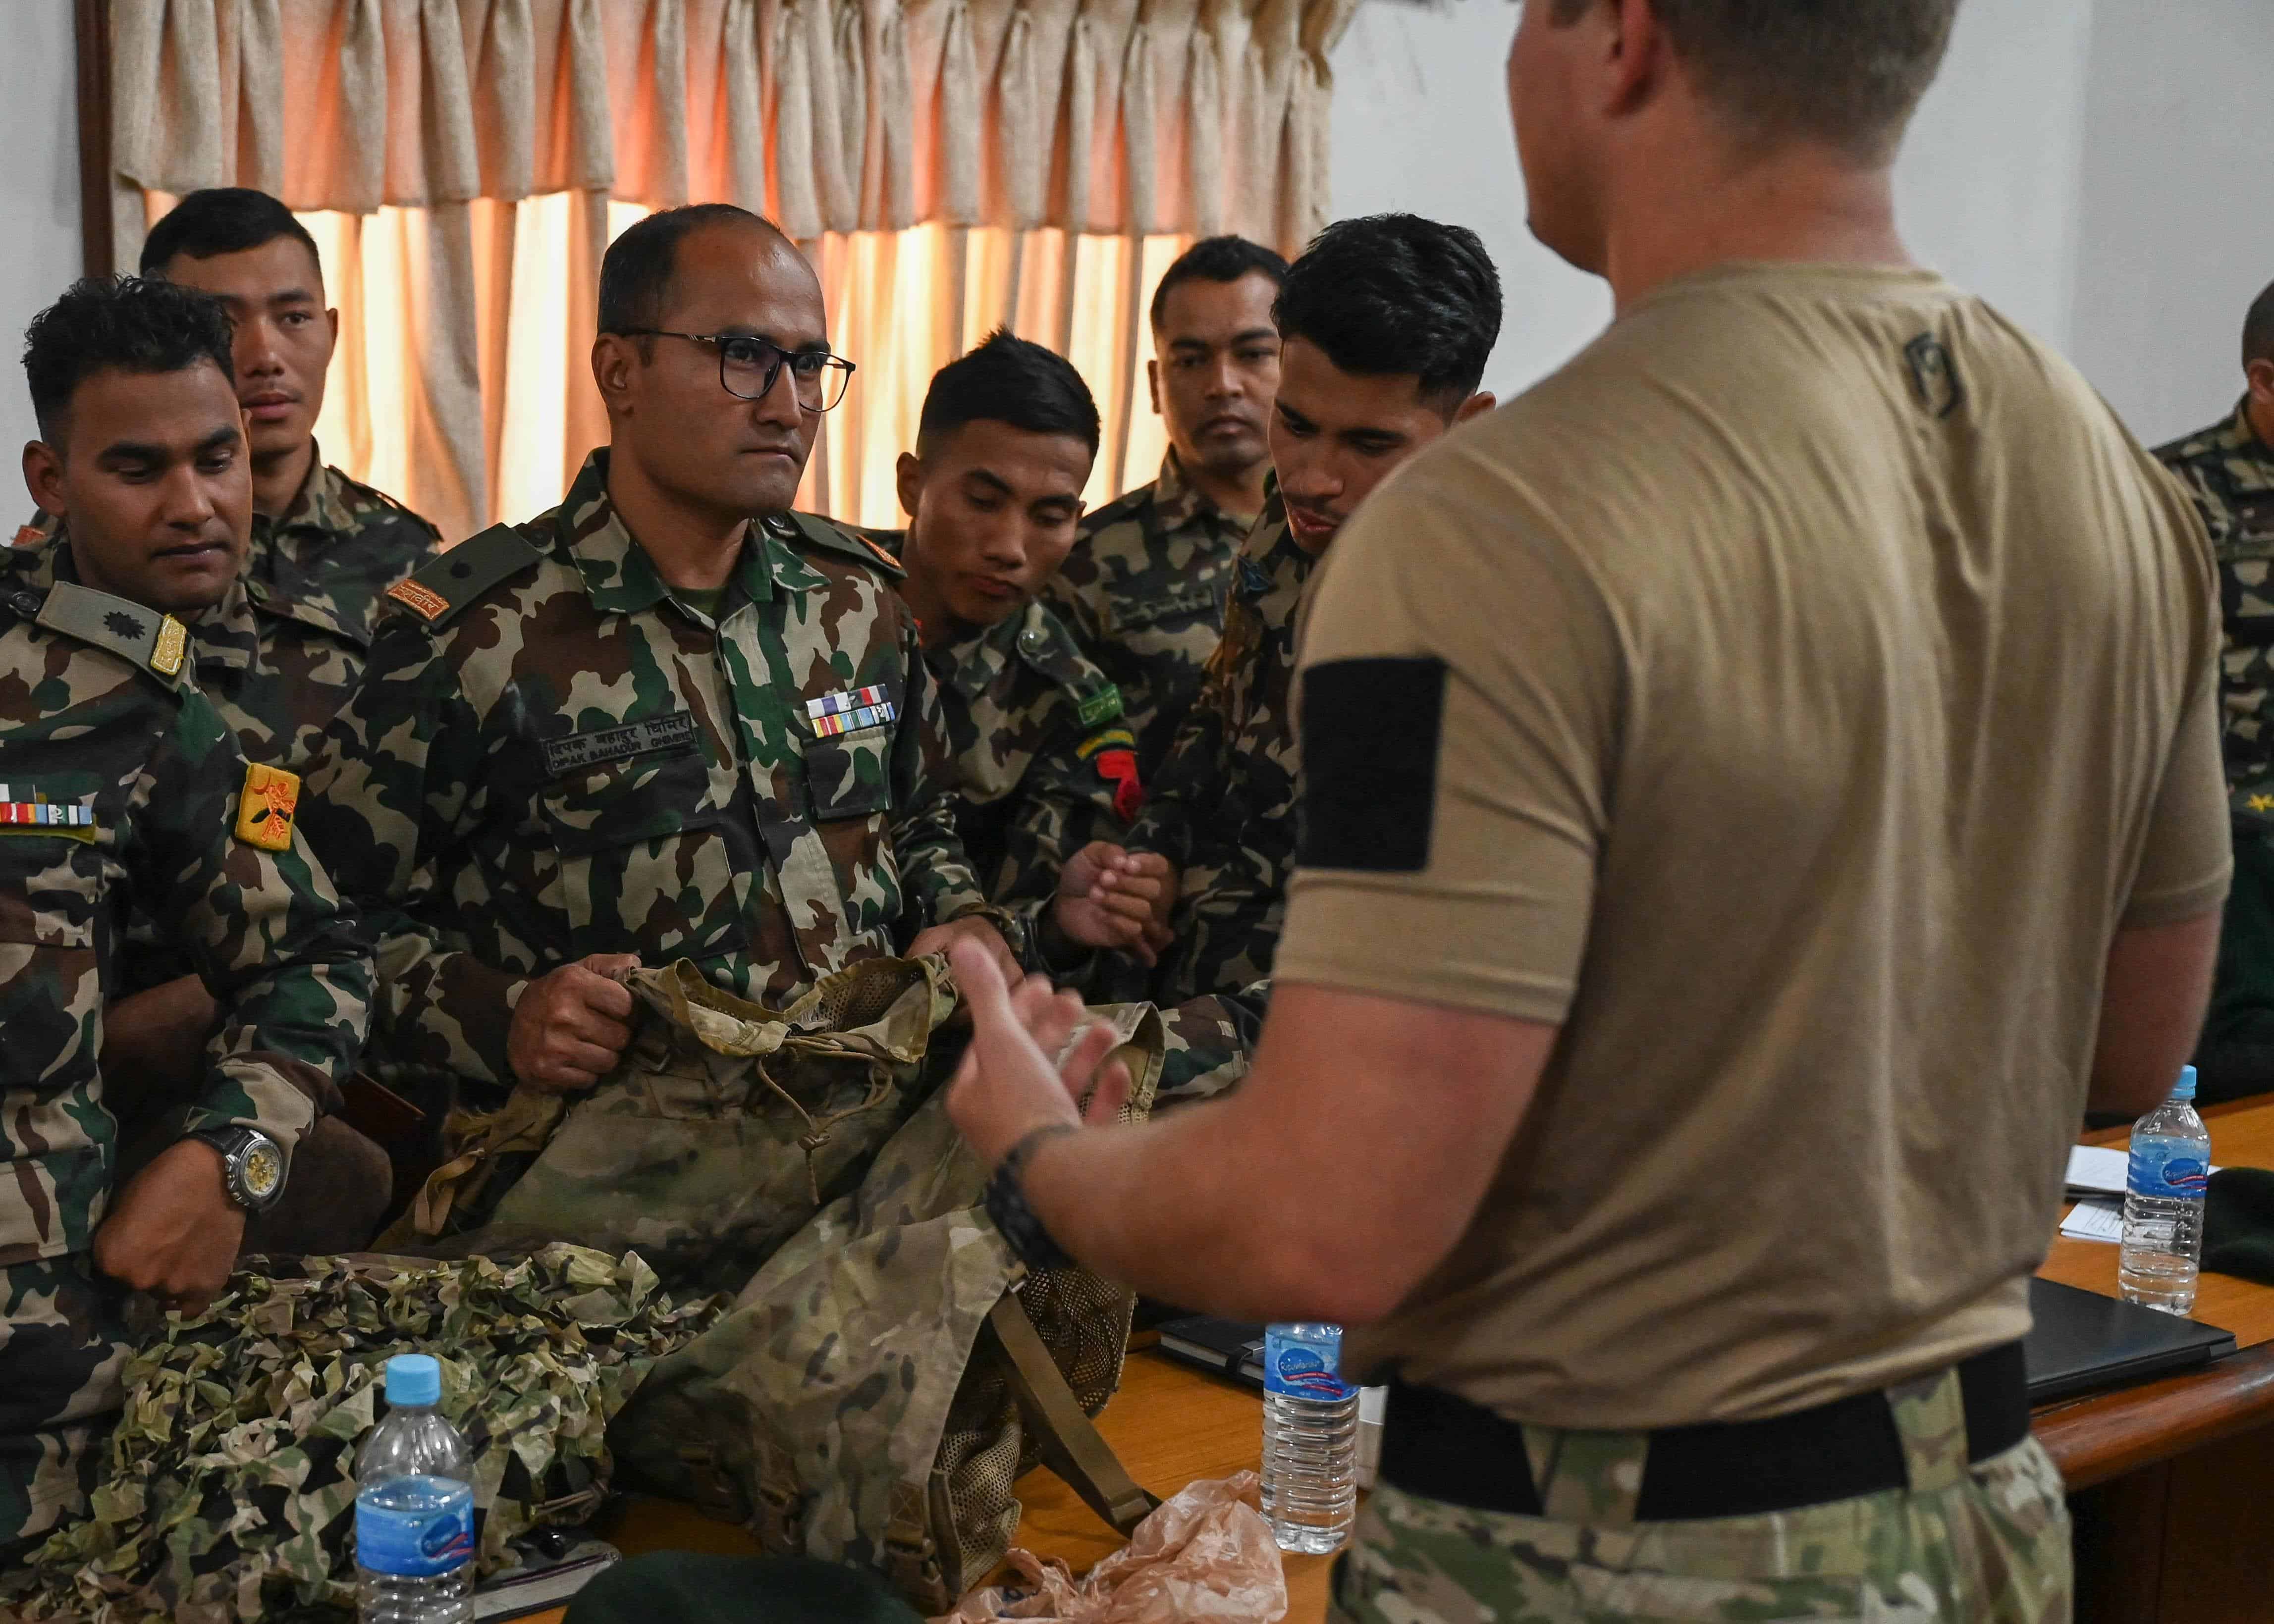 A U.S. Naval special warfare operator discusses camouflage techniques with members of the Nepali Army and Nepali Special Operations Force (SOF) Brigade during a subject matter expert exchange at Ganesh Kashya, the Nepali Army headquarters in Kathmandu, Nepal.